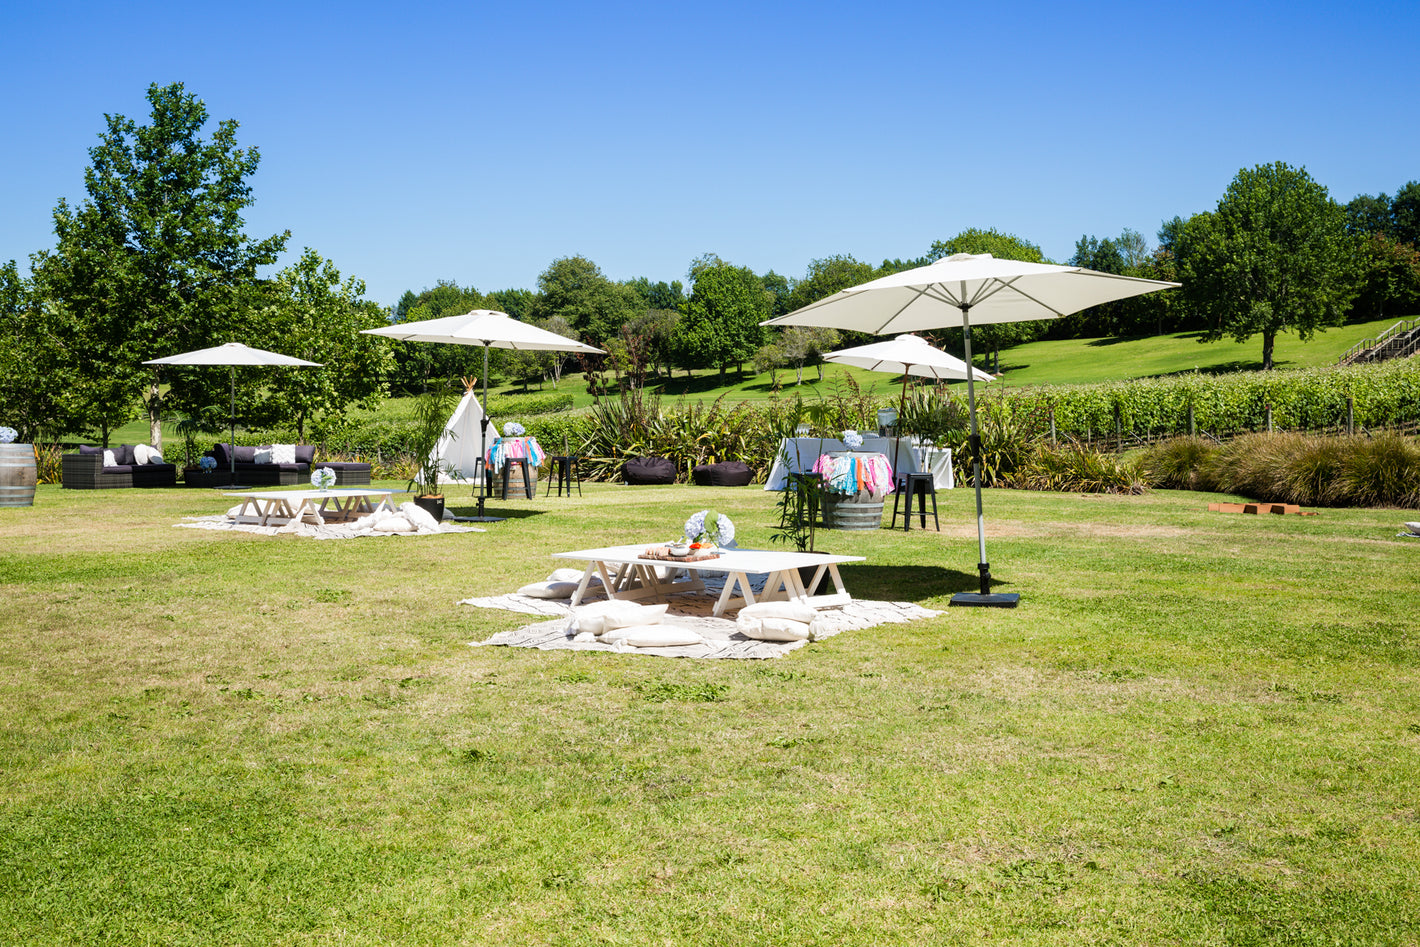 Picnic tables set up in park - rugs and cushions and umbrellas 